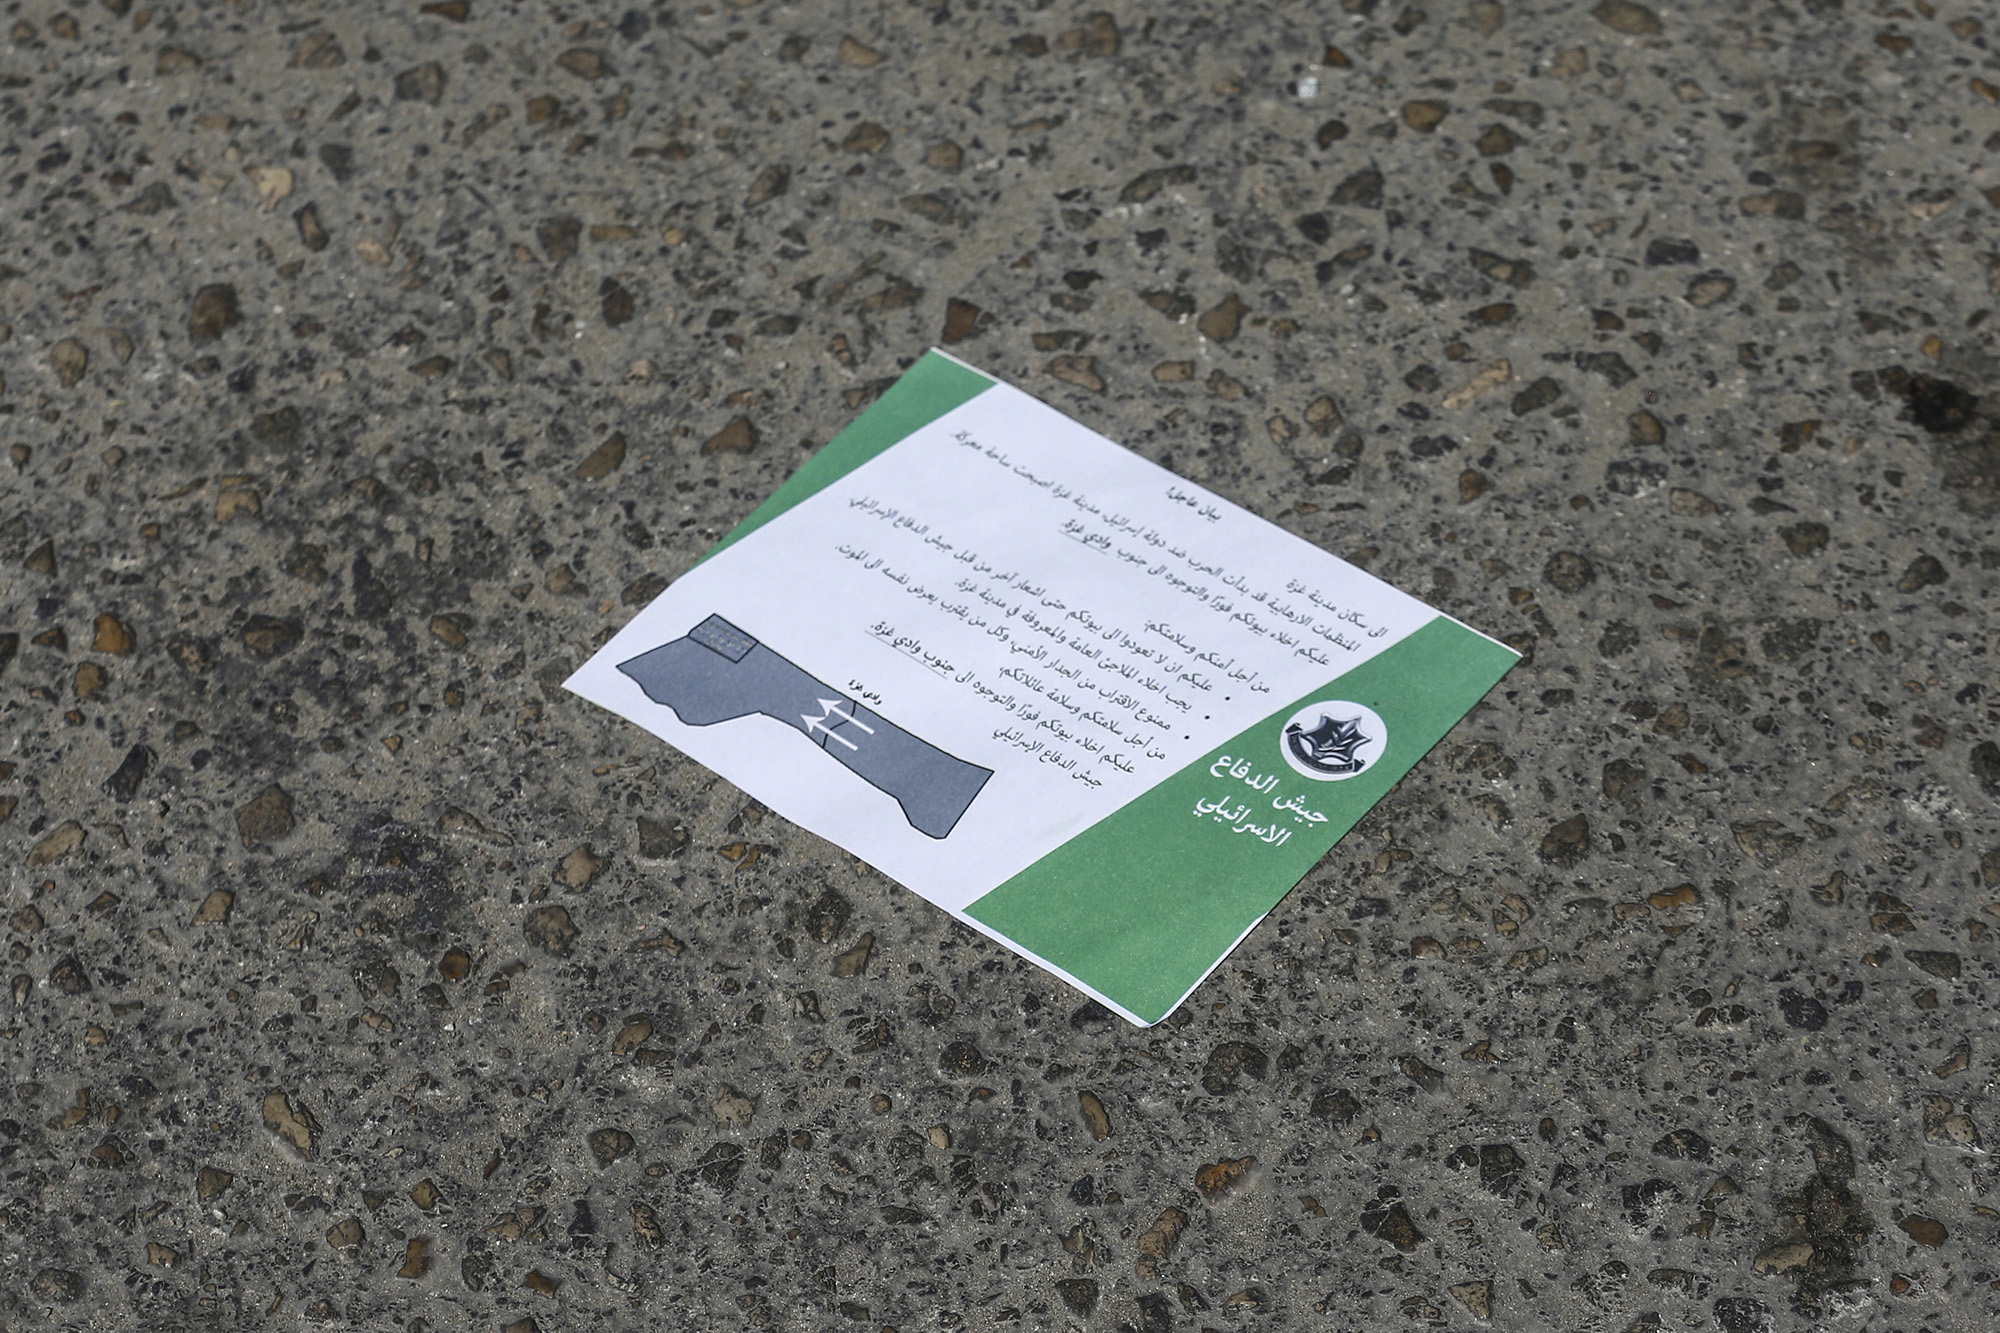 A leaflet lies on the ground dropped by Israeli army planes above Gaza City, asking them to flee to the south of the Strip immediately, on October 13.